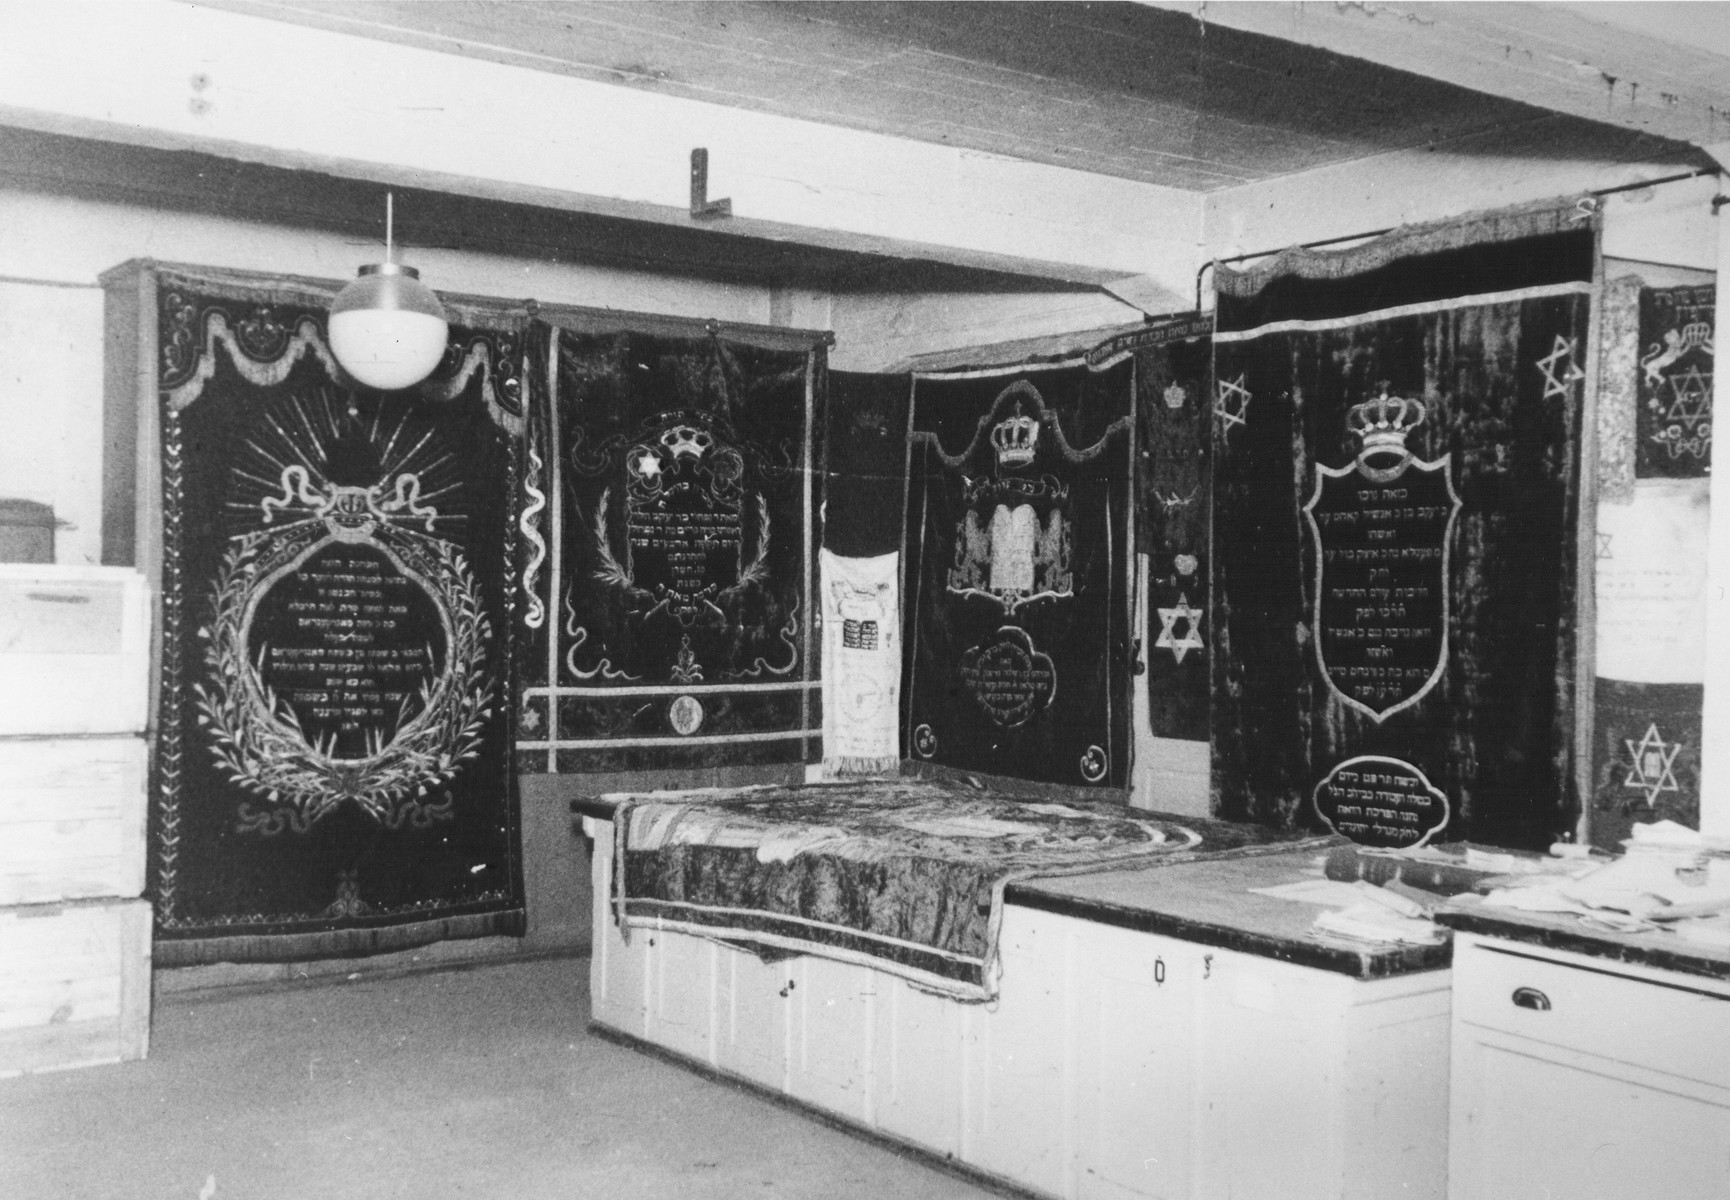 Display of ritual synagogue textiles confiscated by the Nazis.